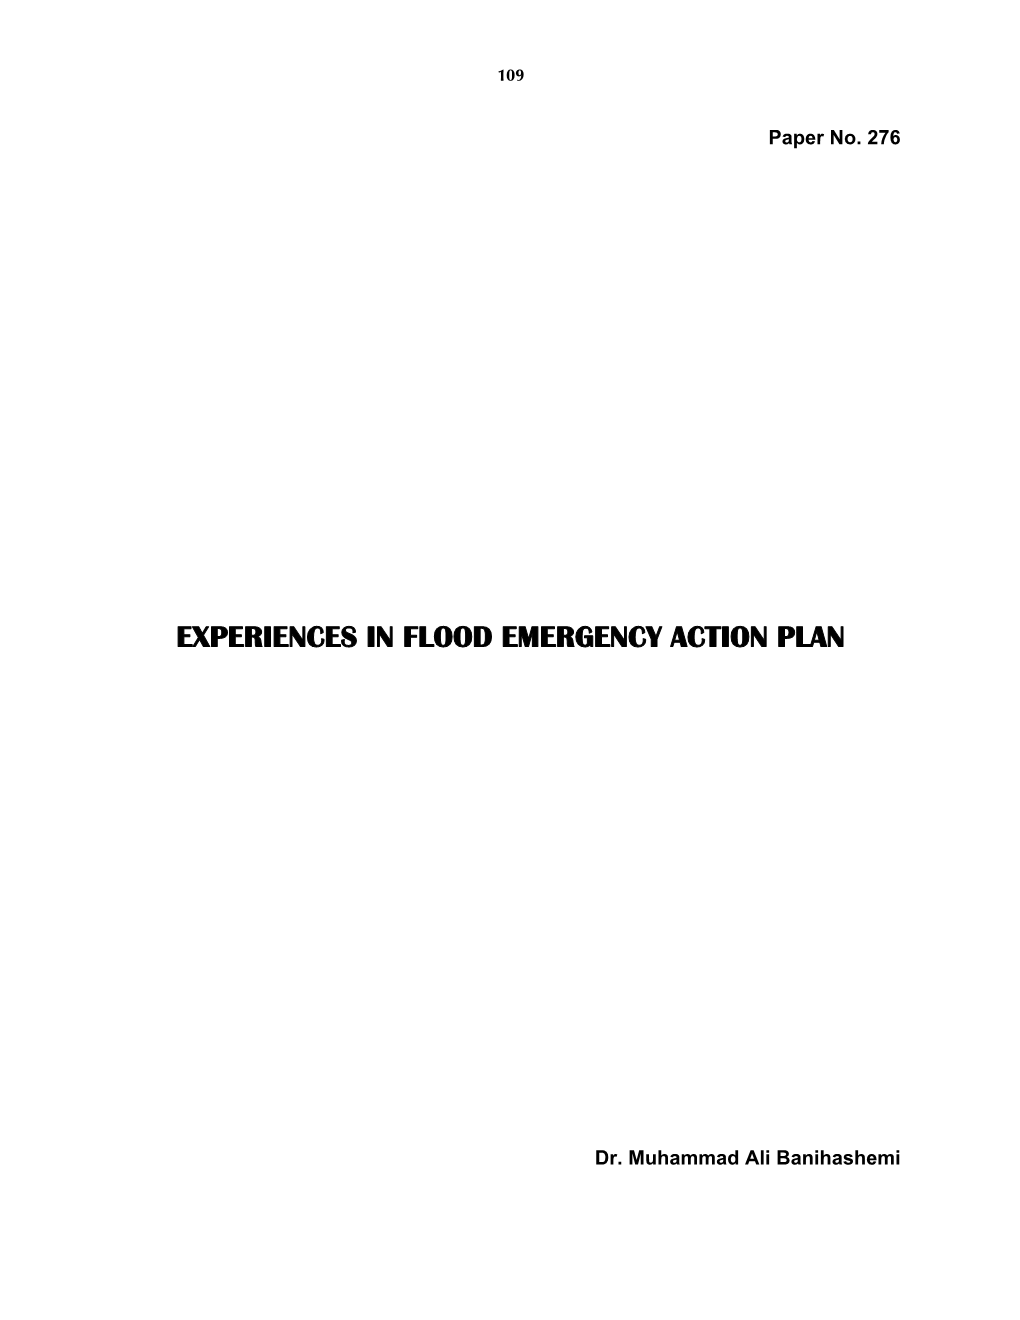 Experiences in Flood Emergency Action Plan